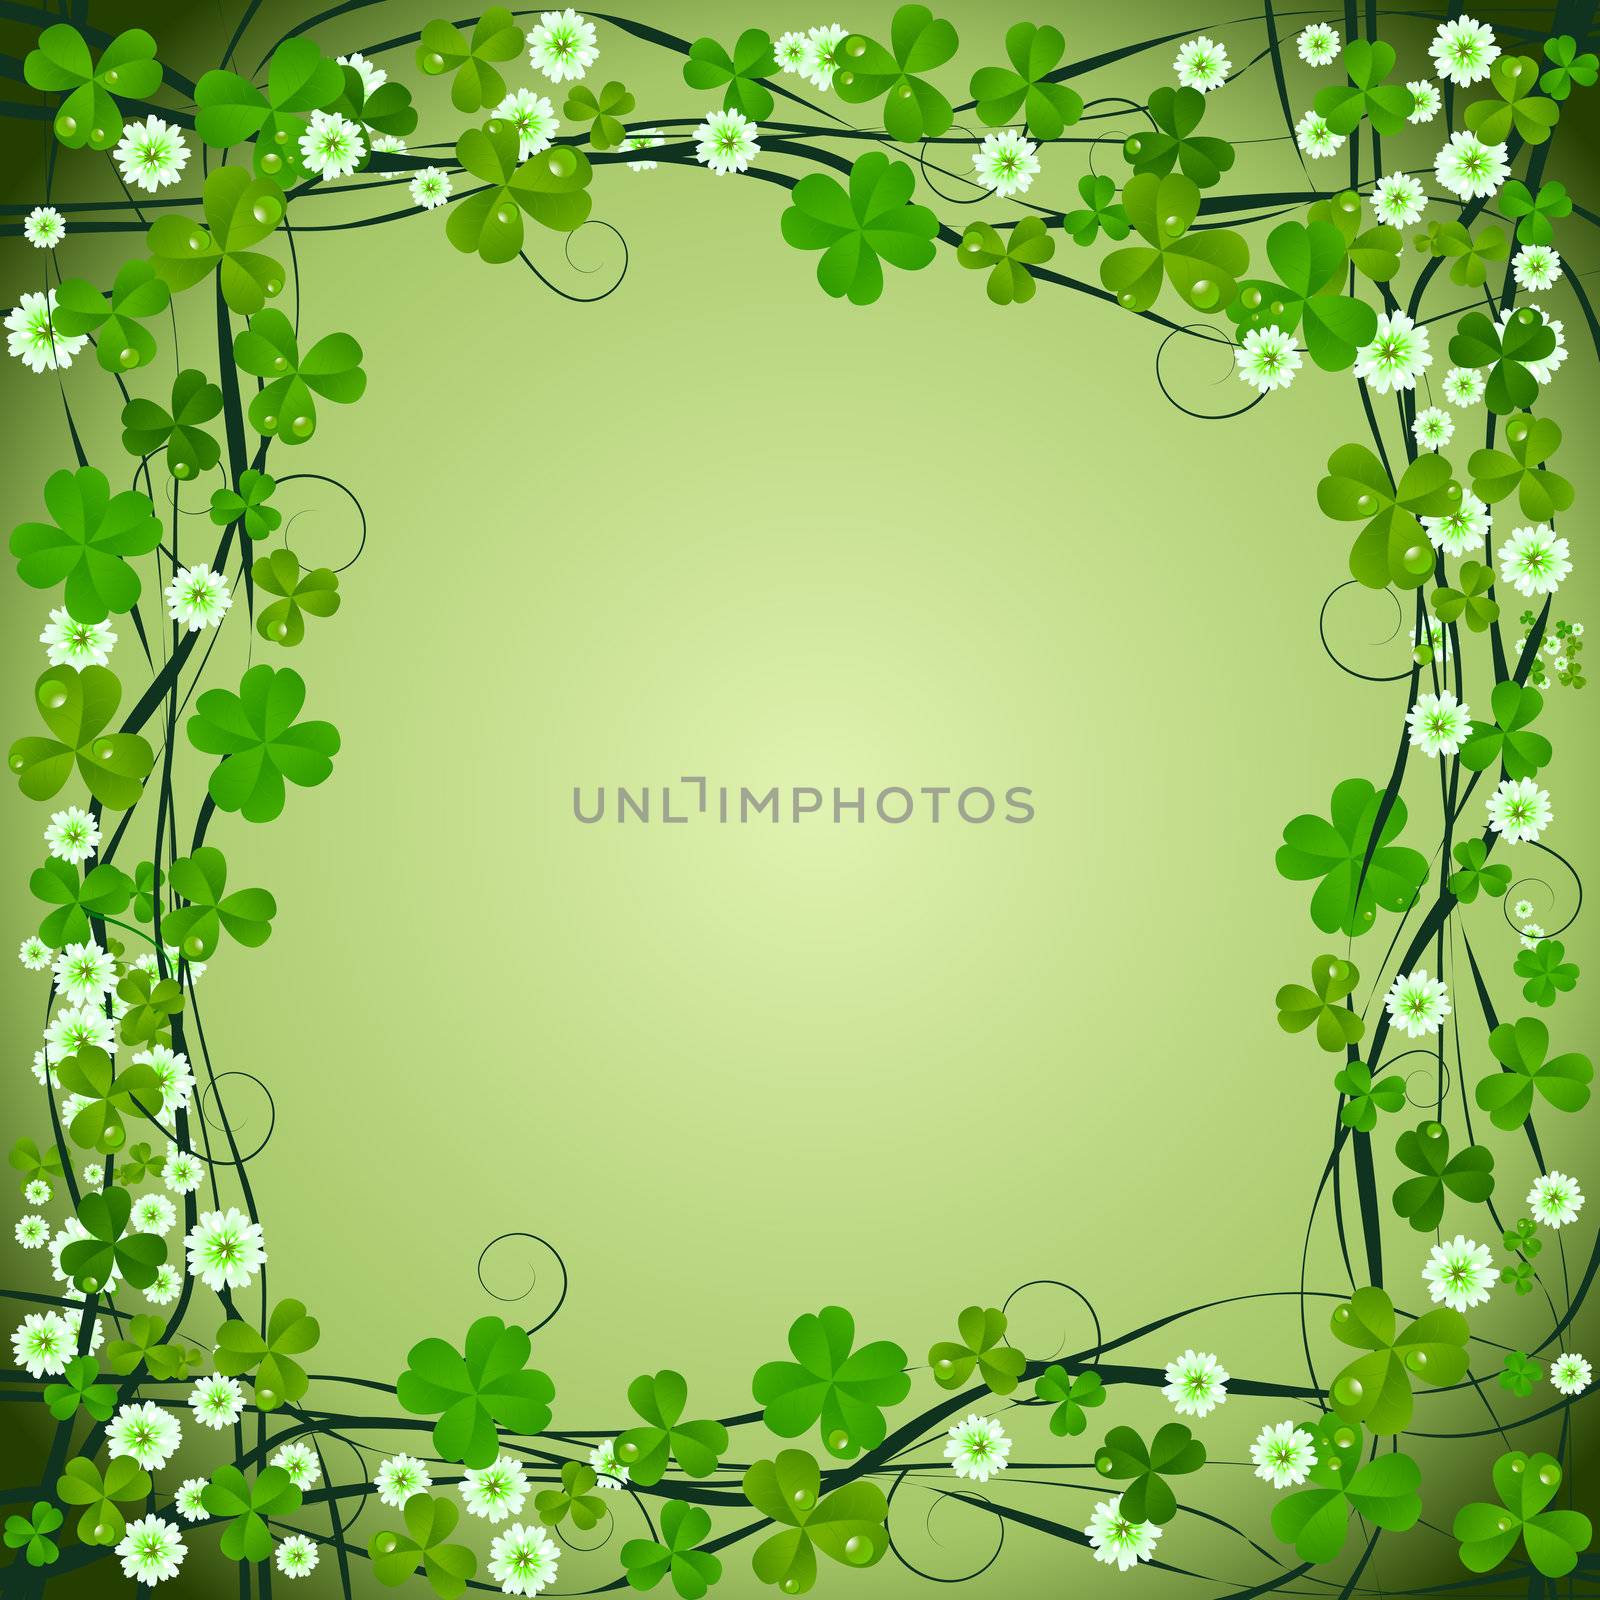 Clover frame background by Lirch